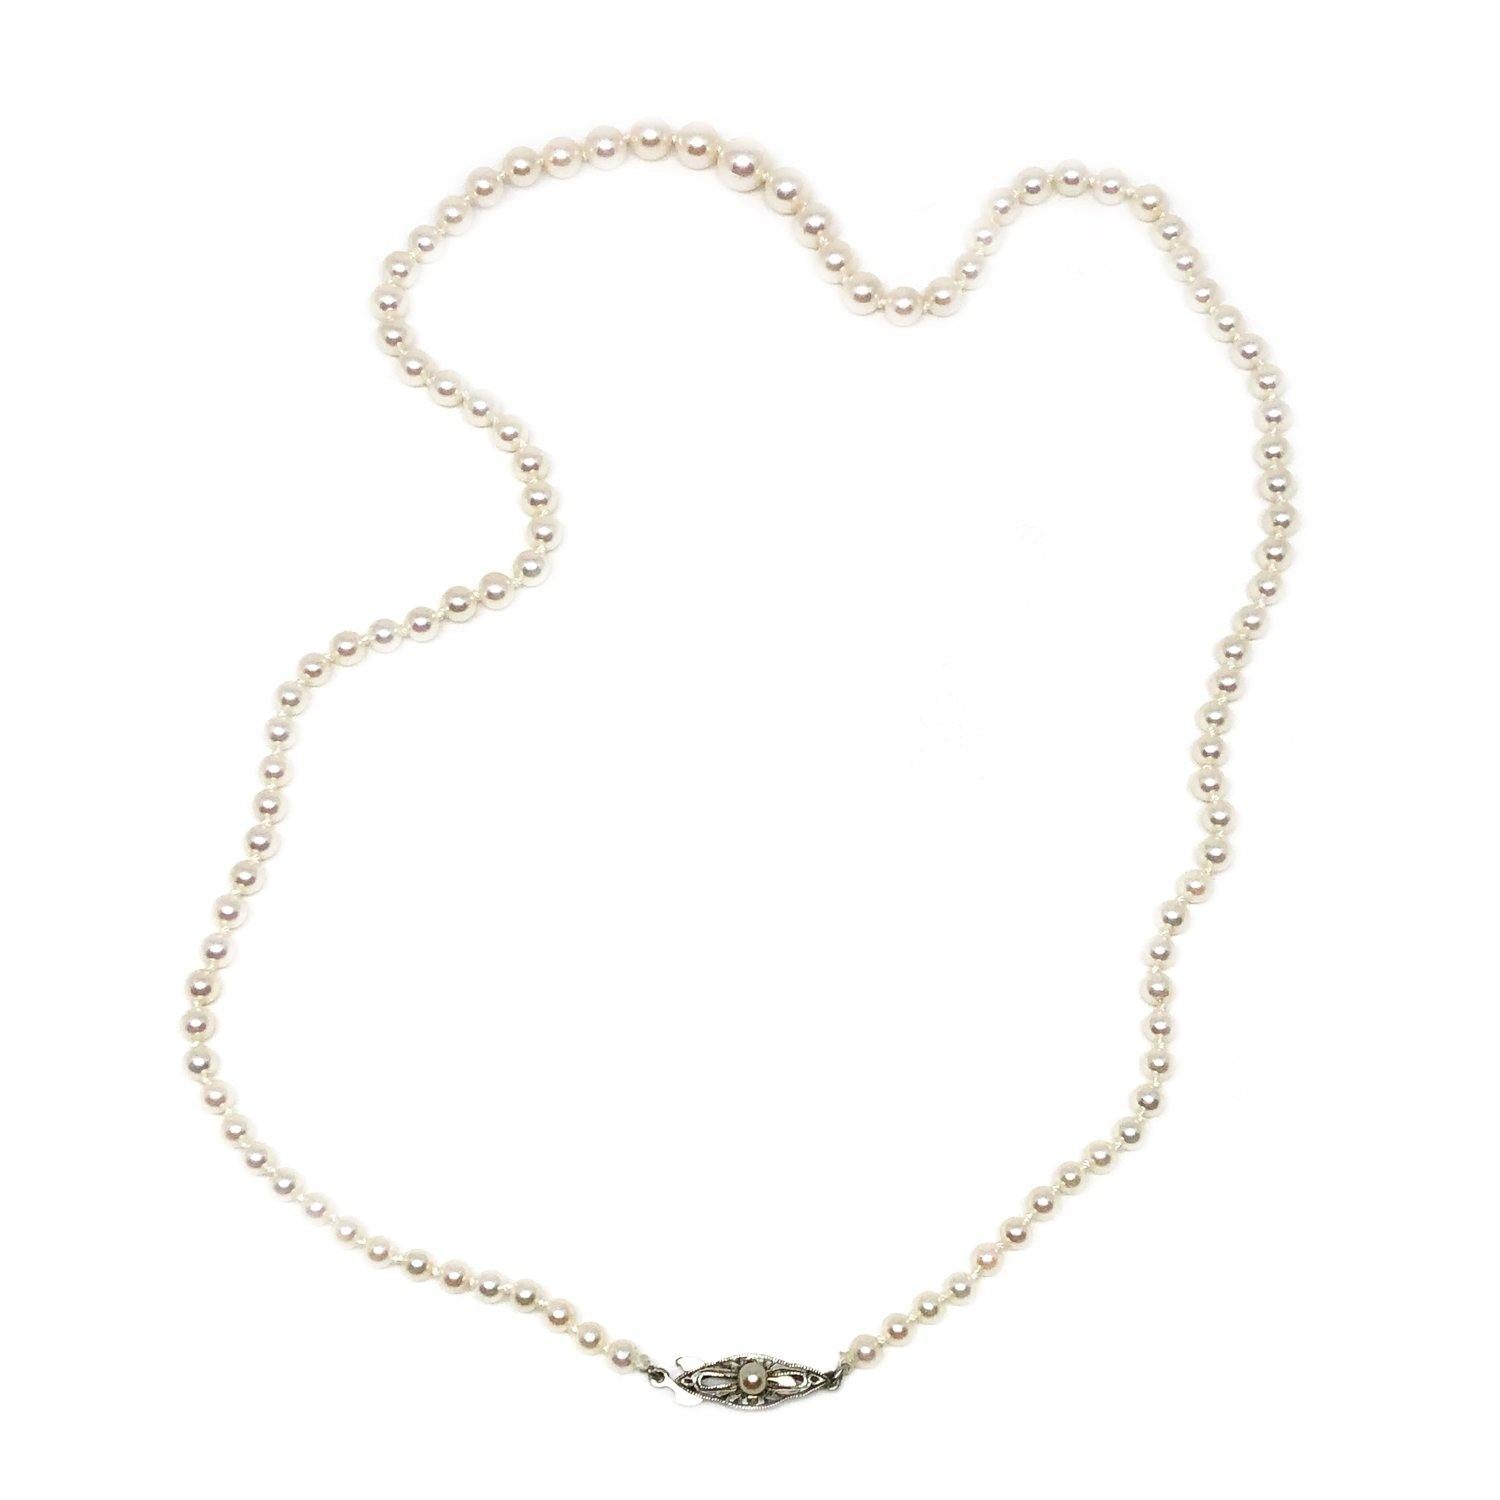 Deco Japanese Saltwater Cultured Akoya Pearl Baroque Necklace - Sterling Silver 21.50 Inch